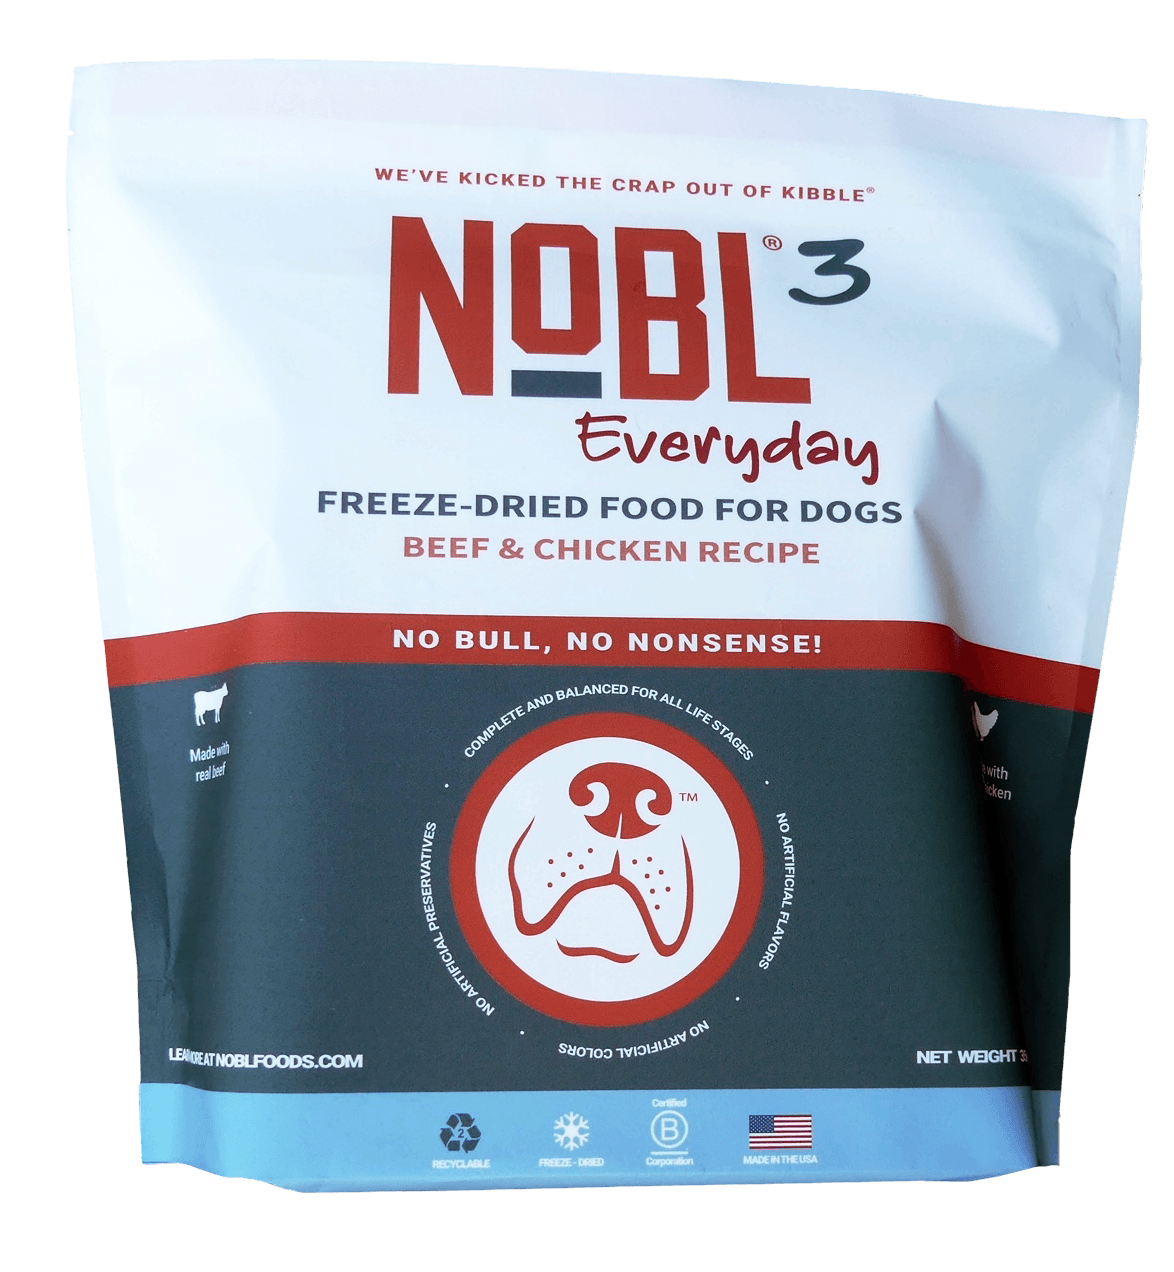 NOBL3 Everyday Beef & Chicken Recipe - All Life Stages - 35oz. - NOBL Foods